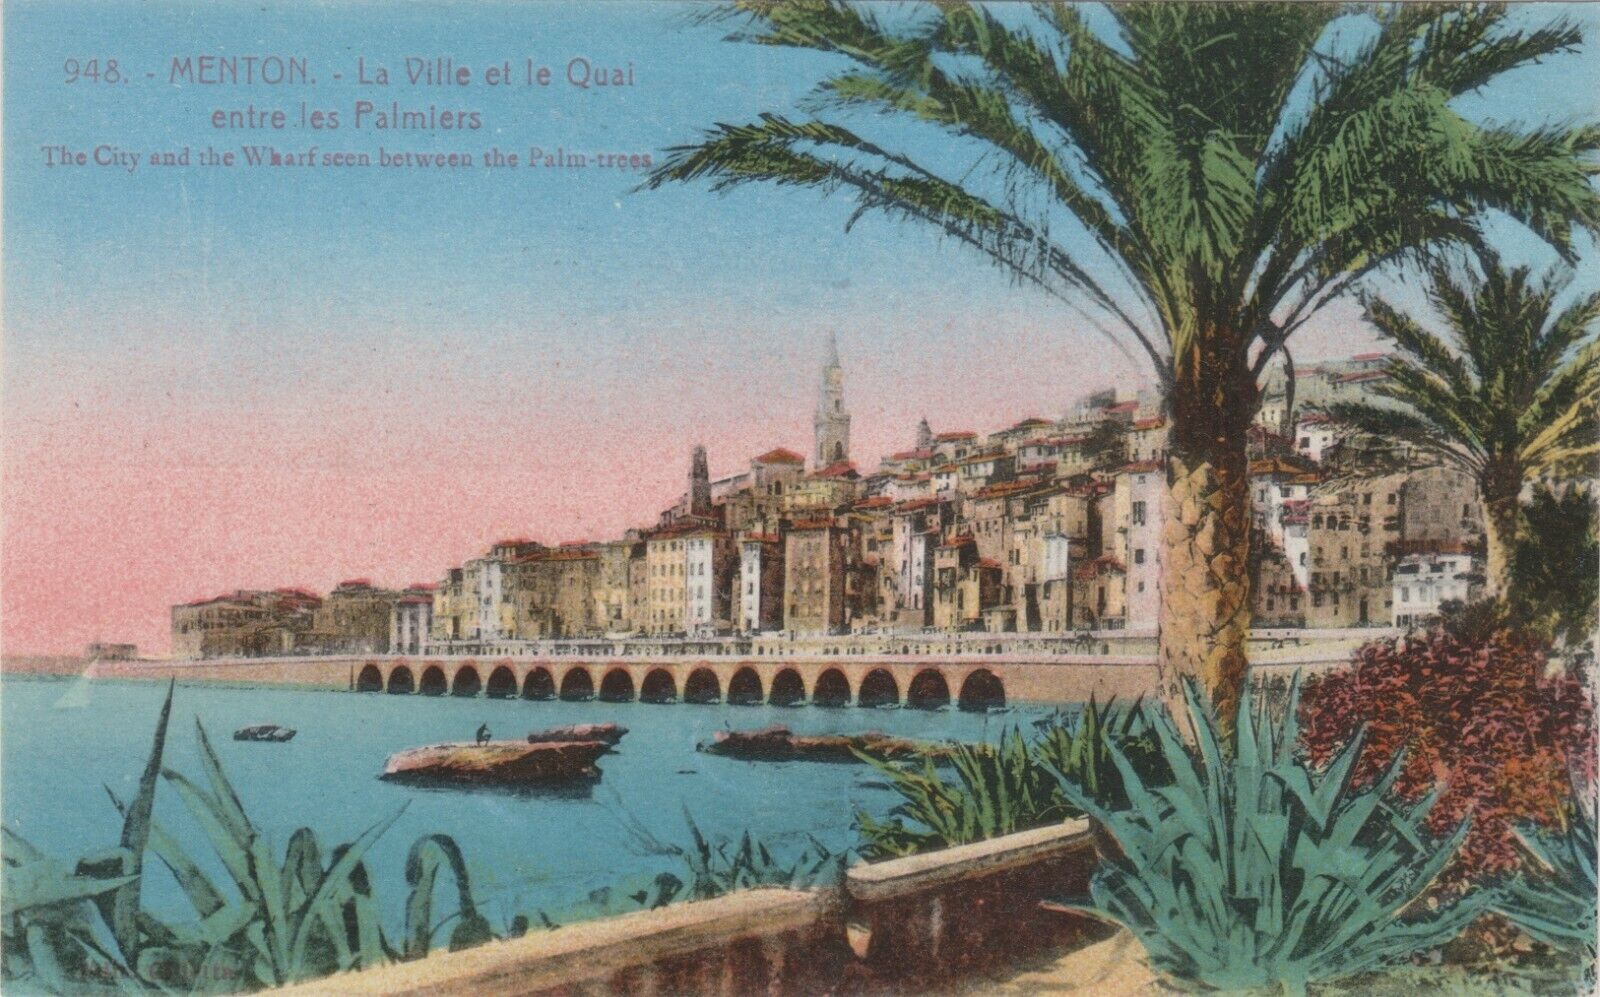 Menton, France. The City of Menton and the Wharf seen between the Palm Trees